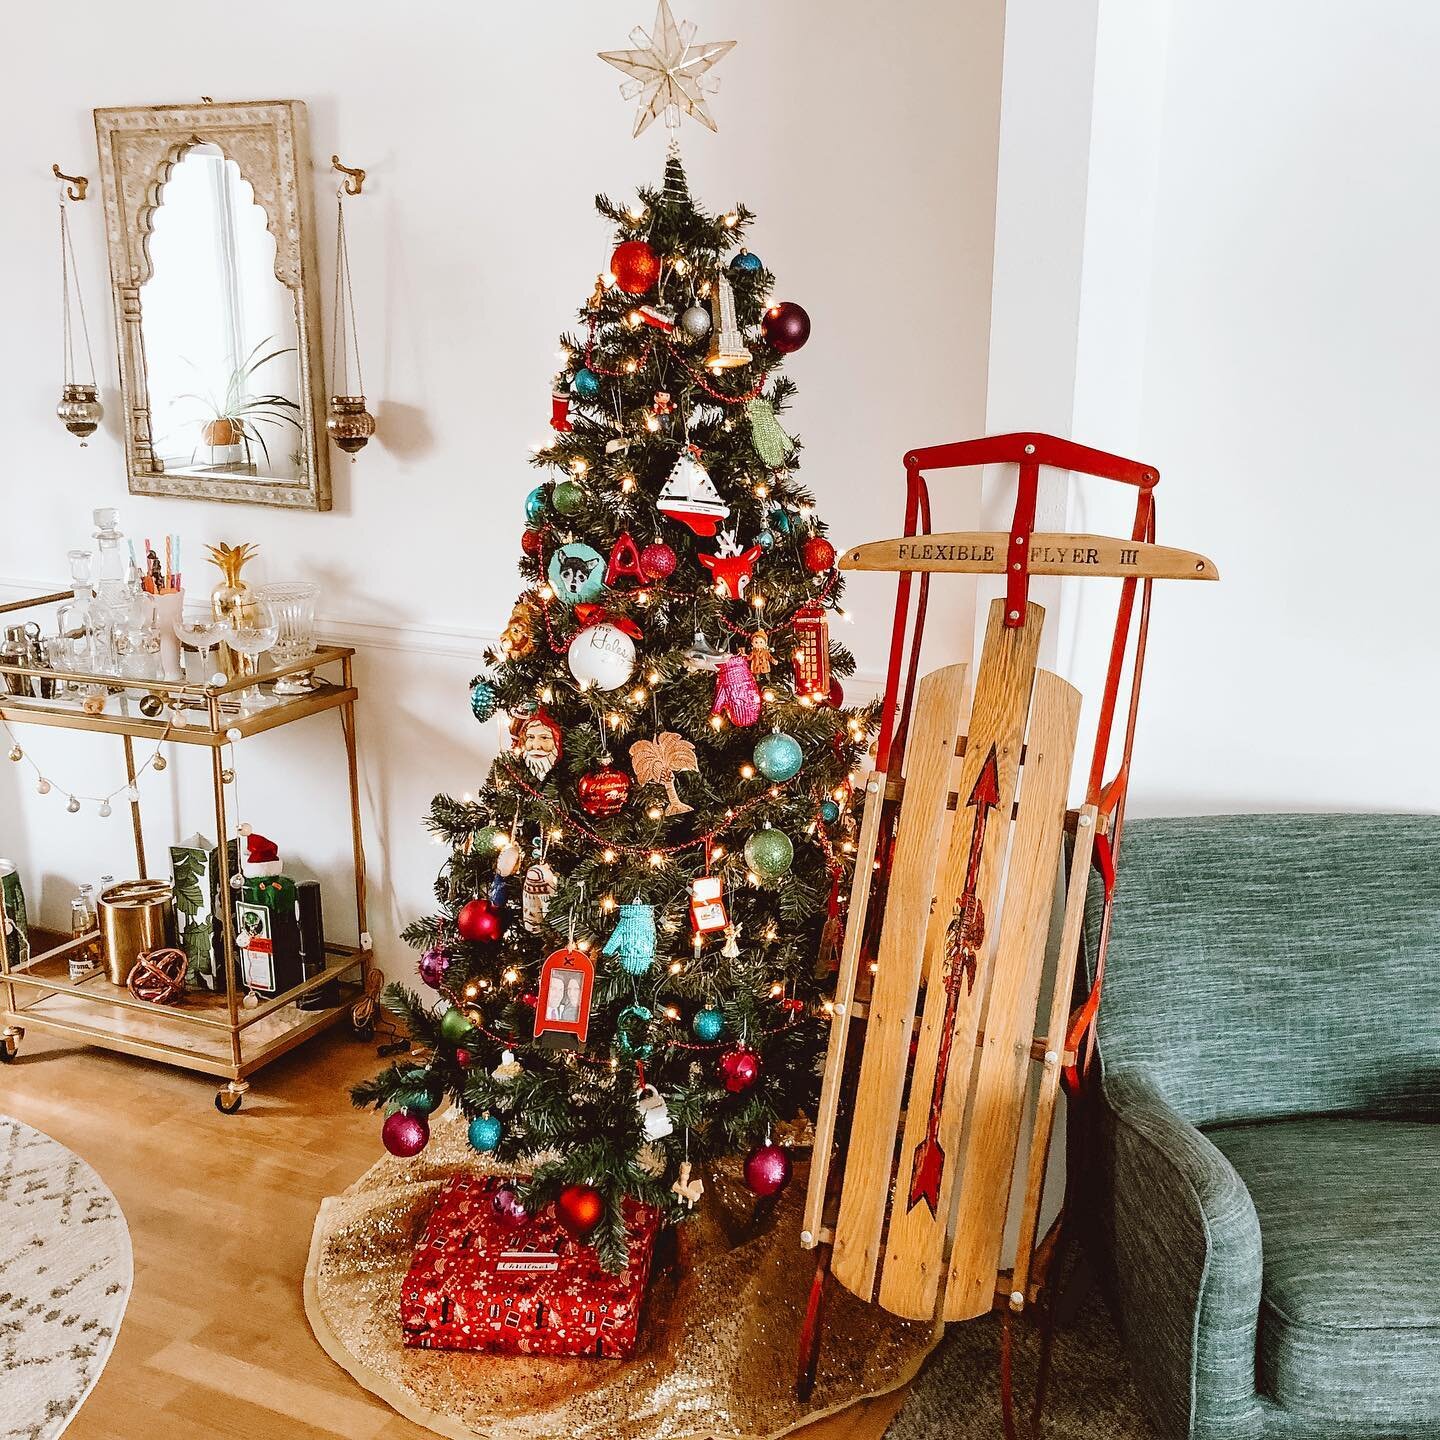 Crushing hard over this adorable vintage #flexibleflyer III sled! This is the perfect addition to any holiday decor! SOLD!